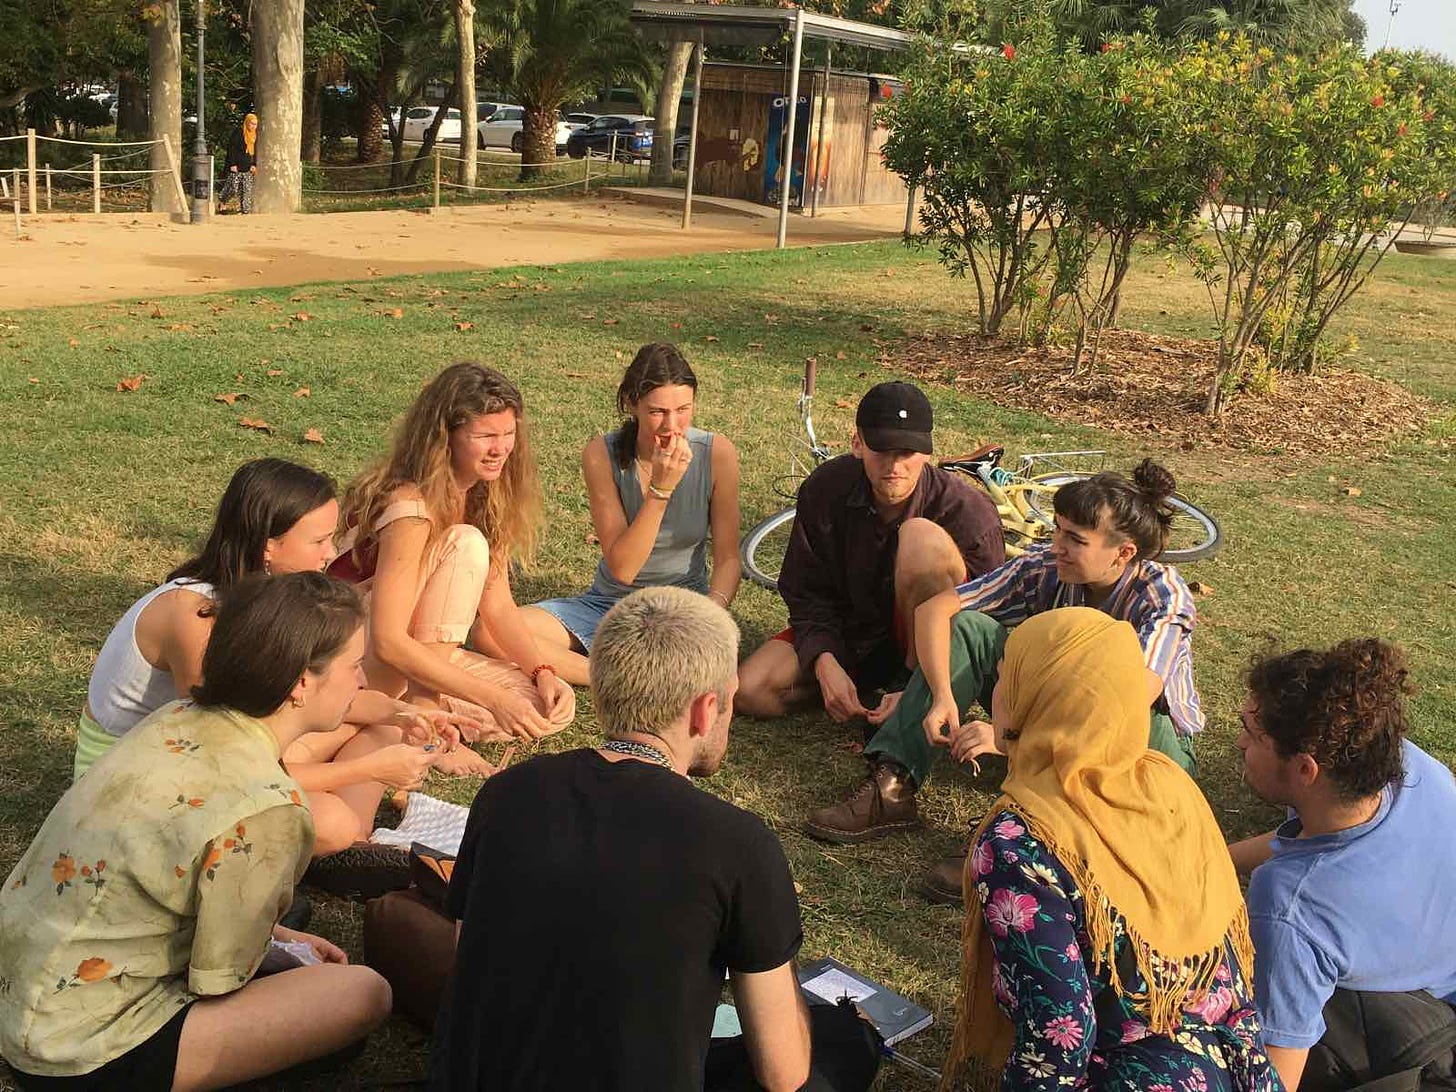 A group of around 10 students sit in a circle on some grass in discussion on a sunny day